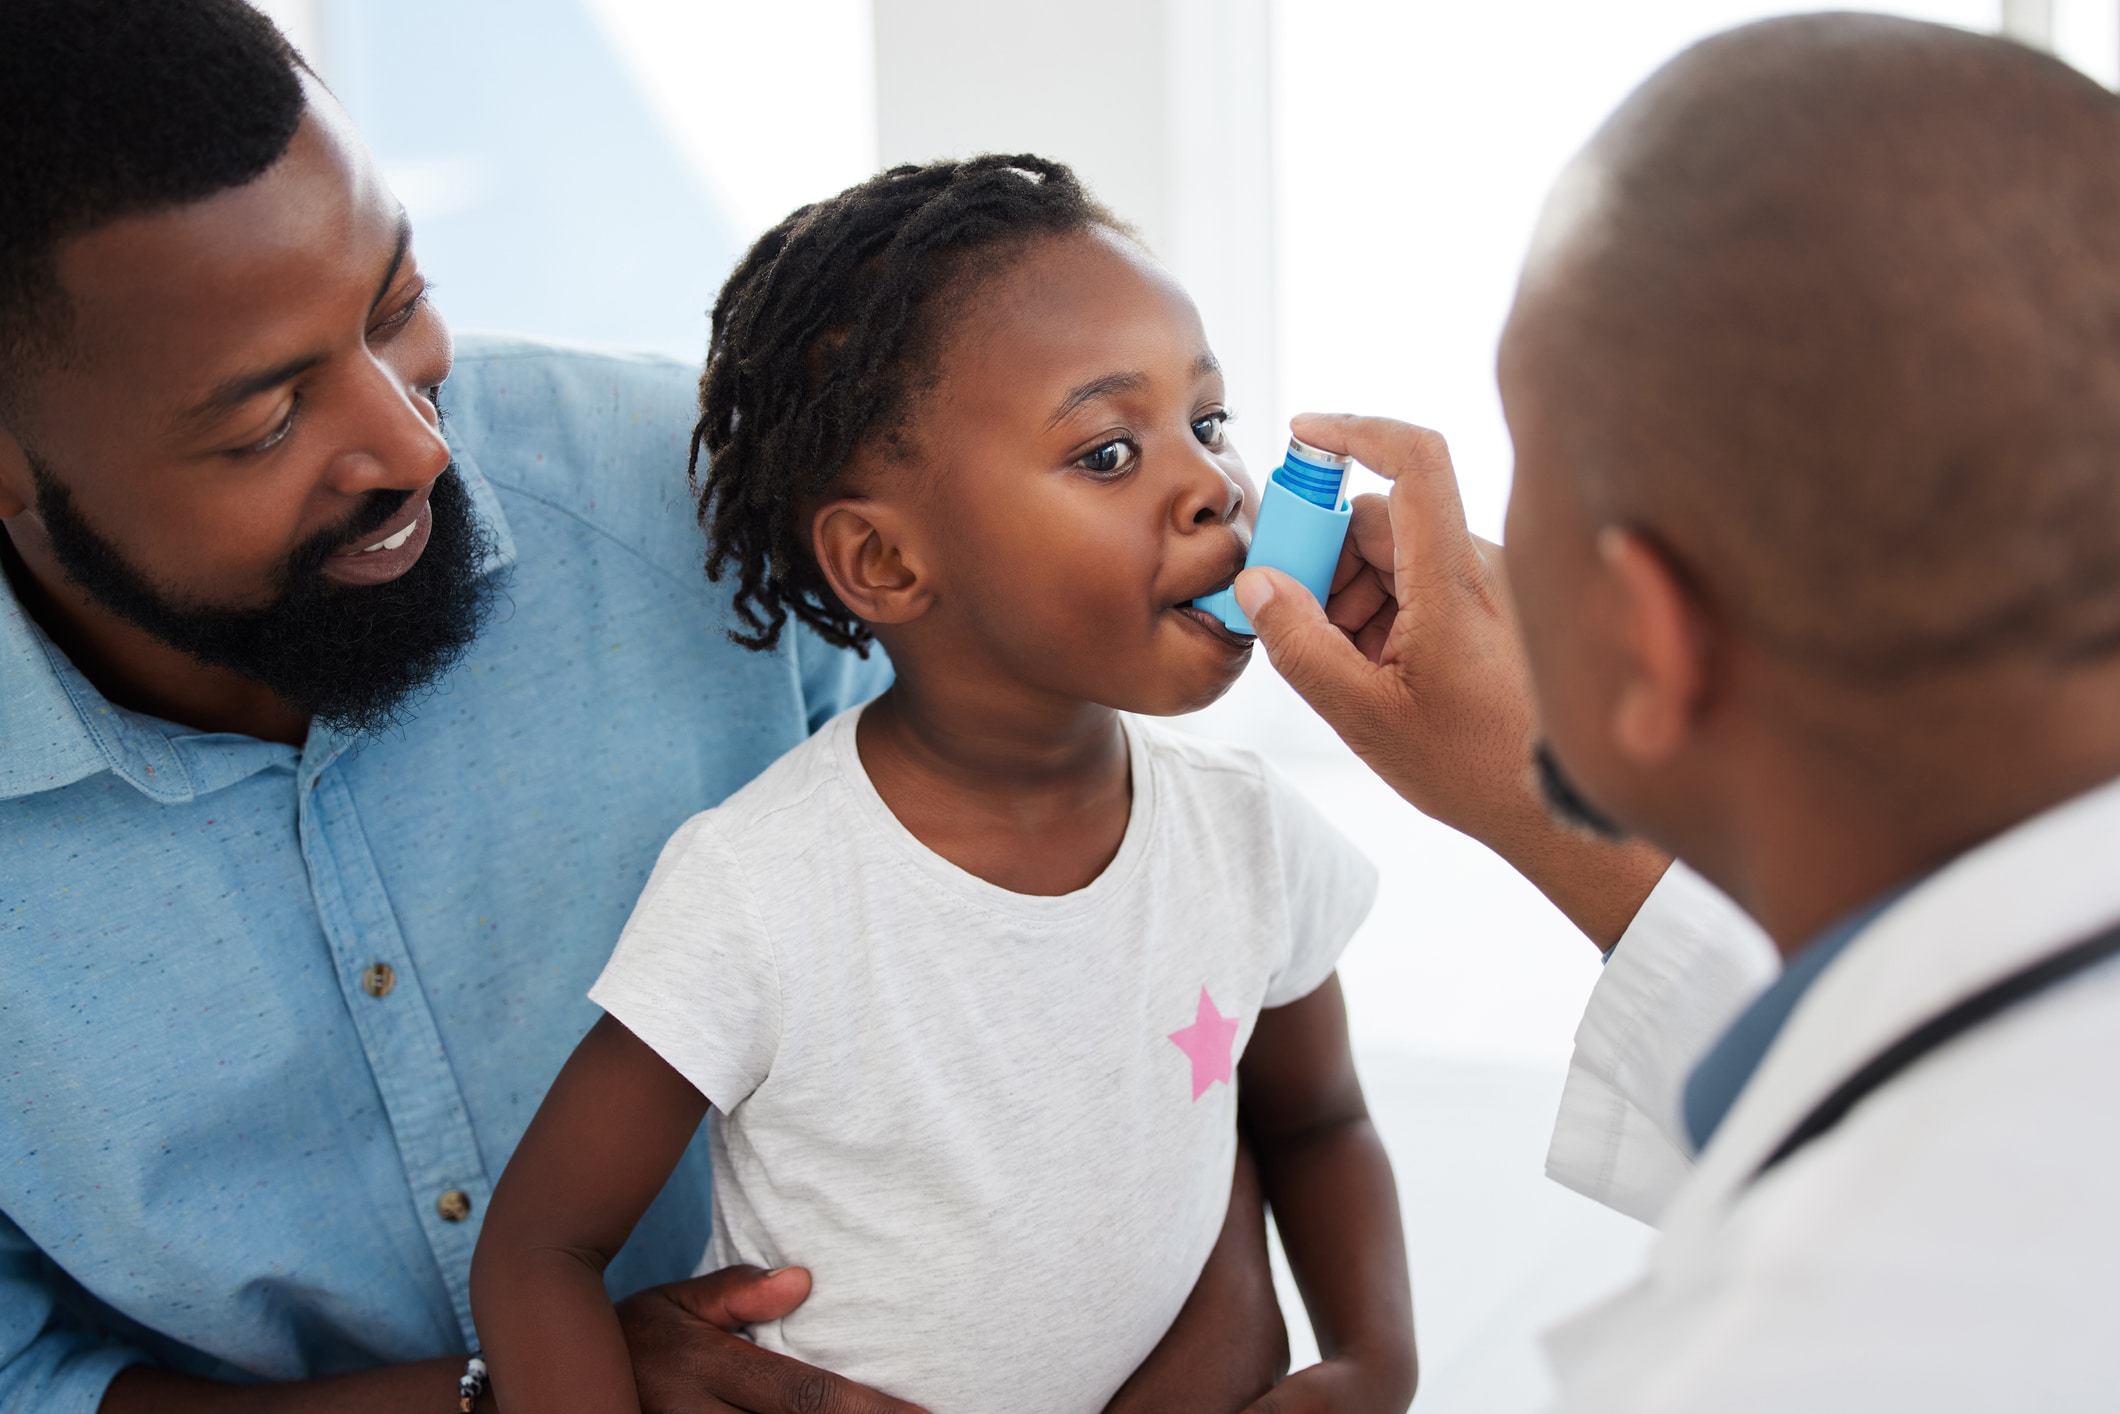 Doctor helping a child patient with an inhaler for asthma in his office at a medical clinic. Healthcare worker consulting a girl with chest or respiratory problems with pump in a children's hospital.